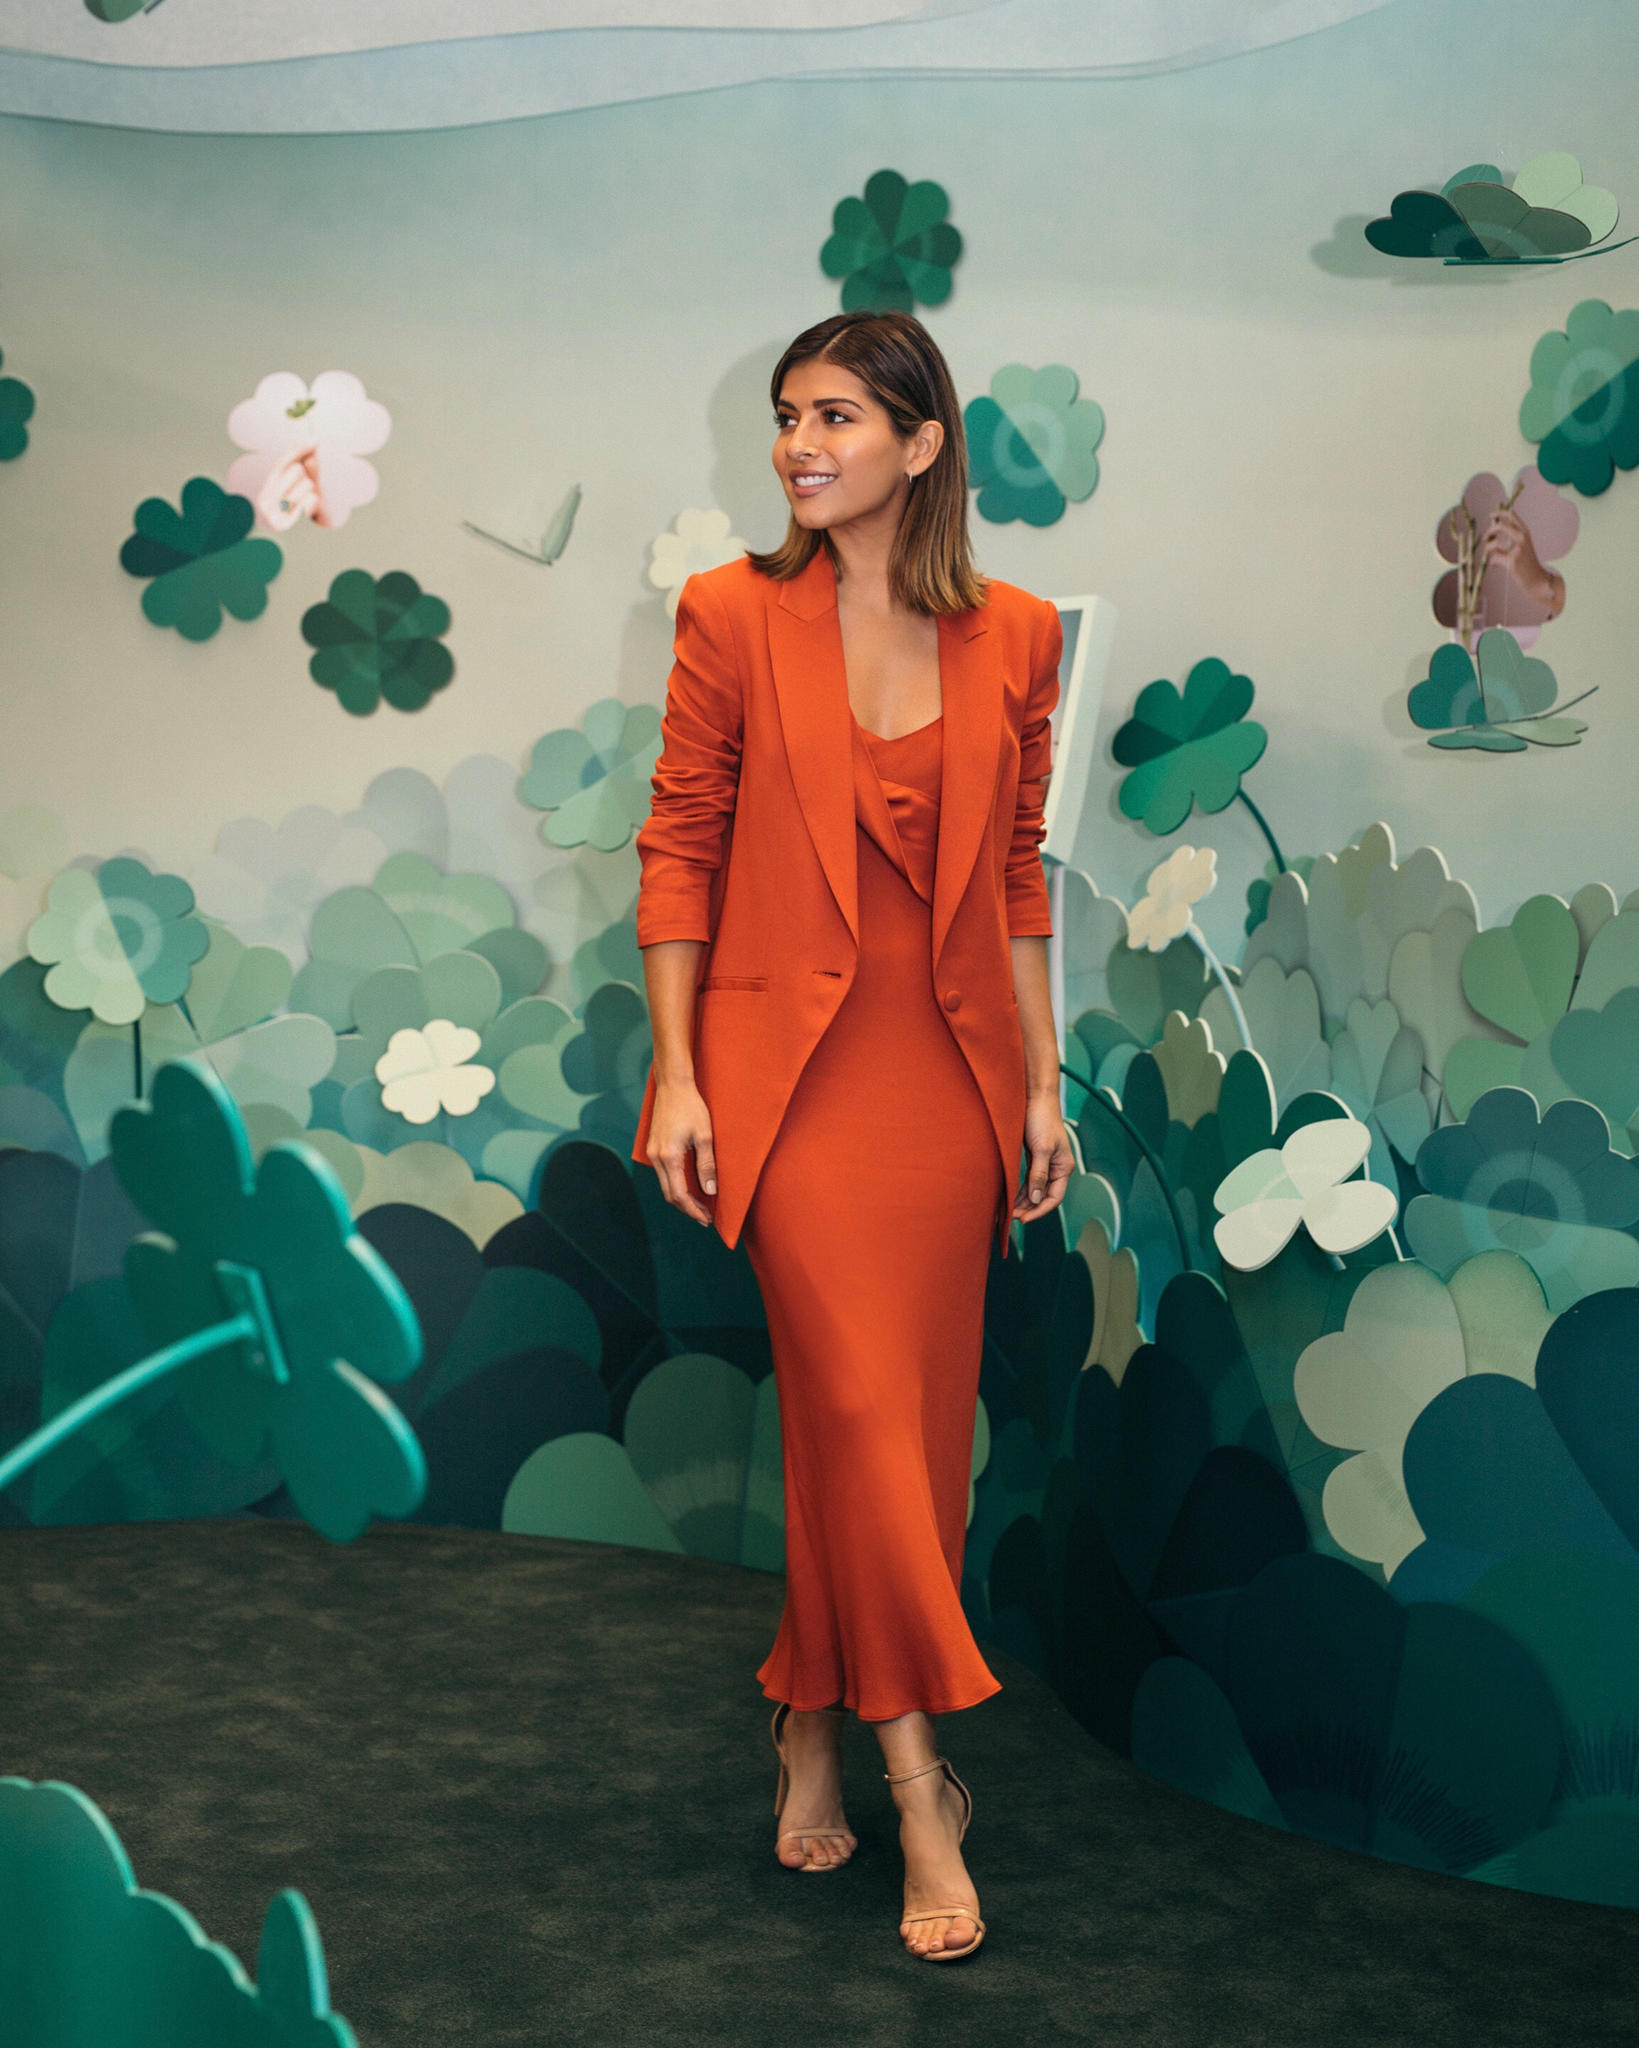 The Fashion Brands I've Been Obsessed With by Pam Hetlinger | TheGirlFromPanama.com | Michelle mason Dress, orange dress, slip dress trend, blazer trend fall 2018, orange outfit